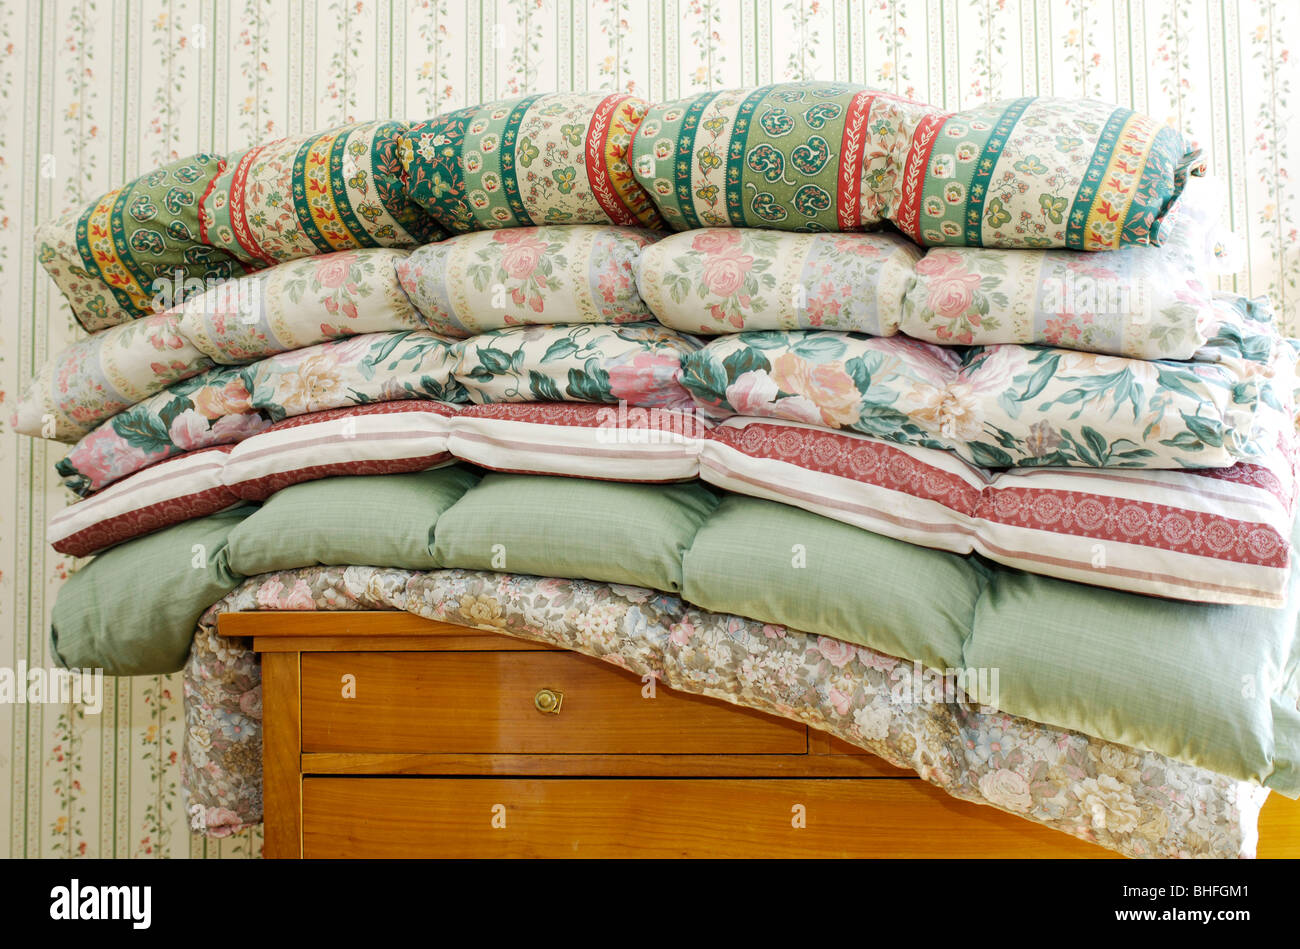 Quilts, bedding in Villa Hermes, Seis am Schlern, South Tyrol, Italy Stock Photo